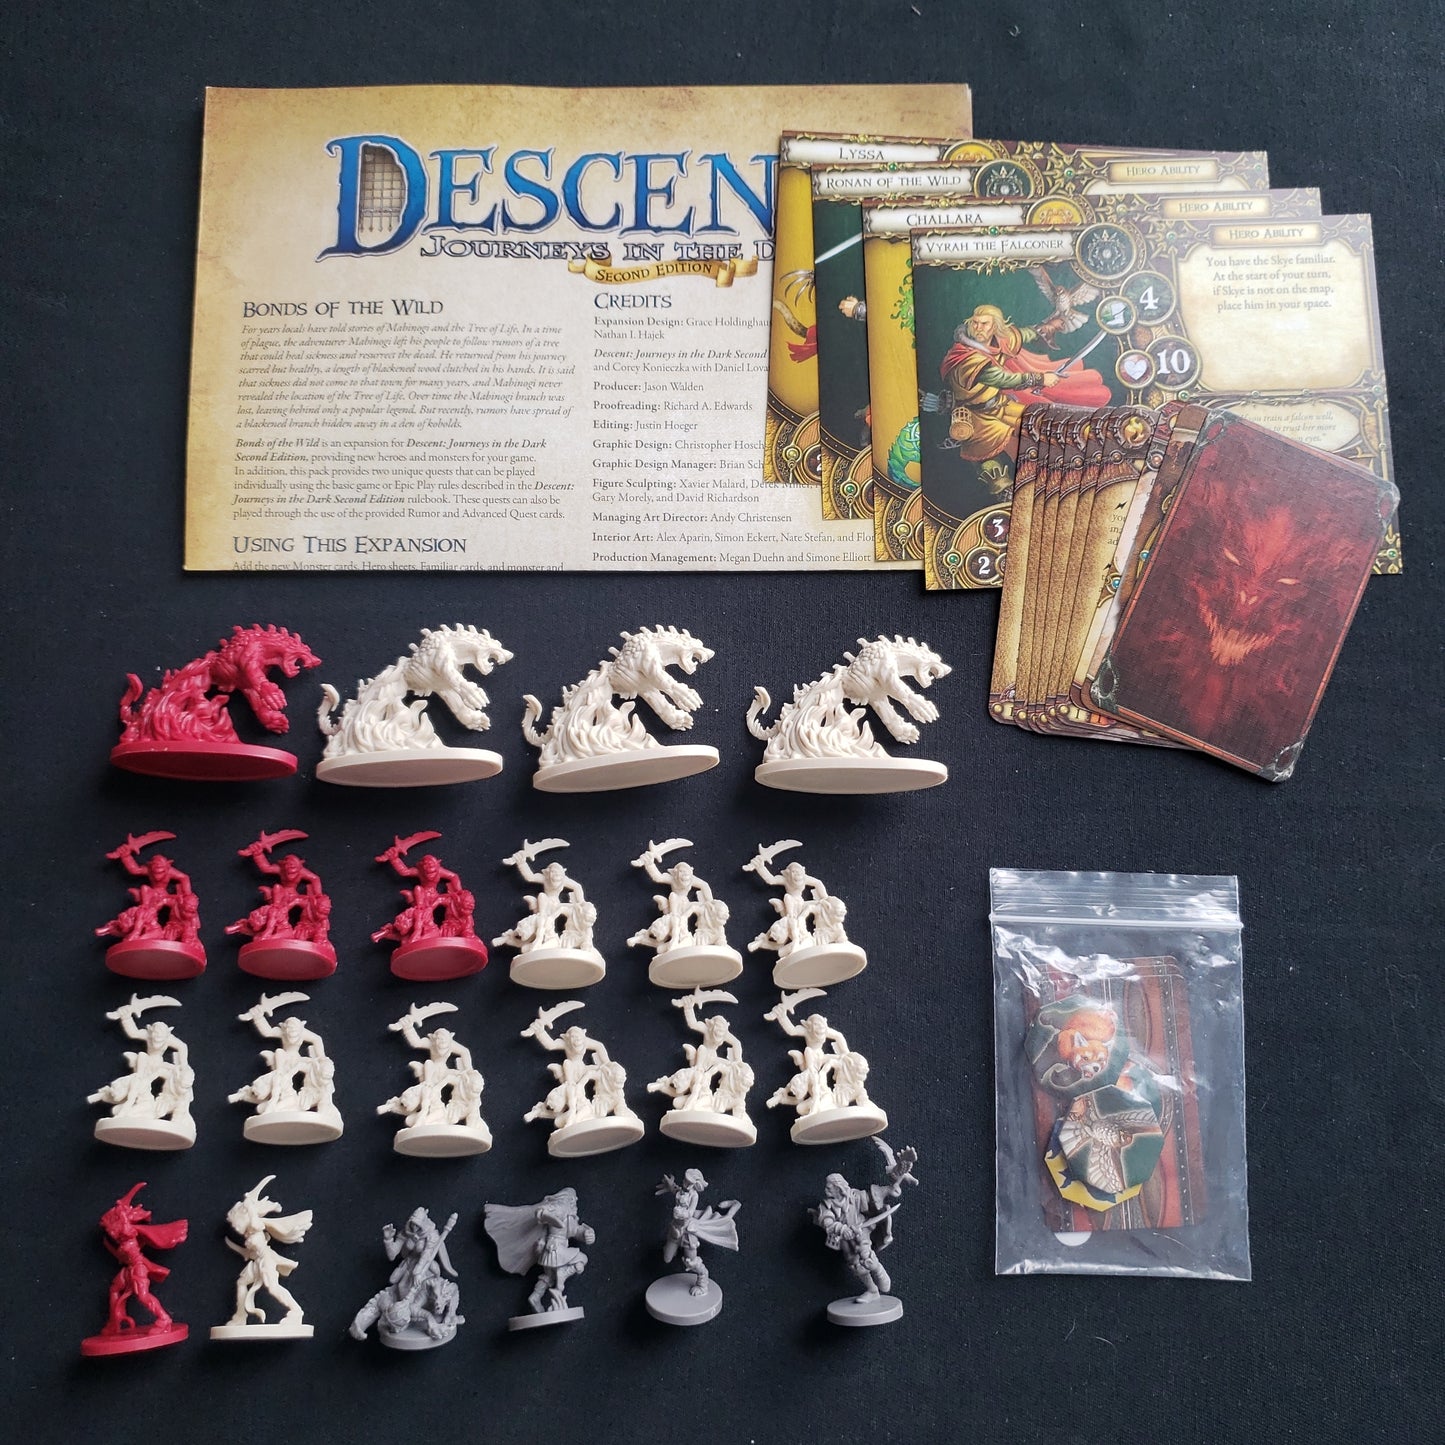 Image shows the components & instructions for the Bonds of the Wild expansion for the board game Descent: Journeys in the Dark Second Edition